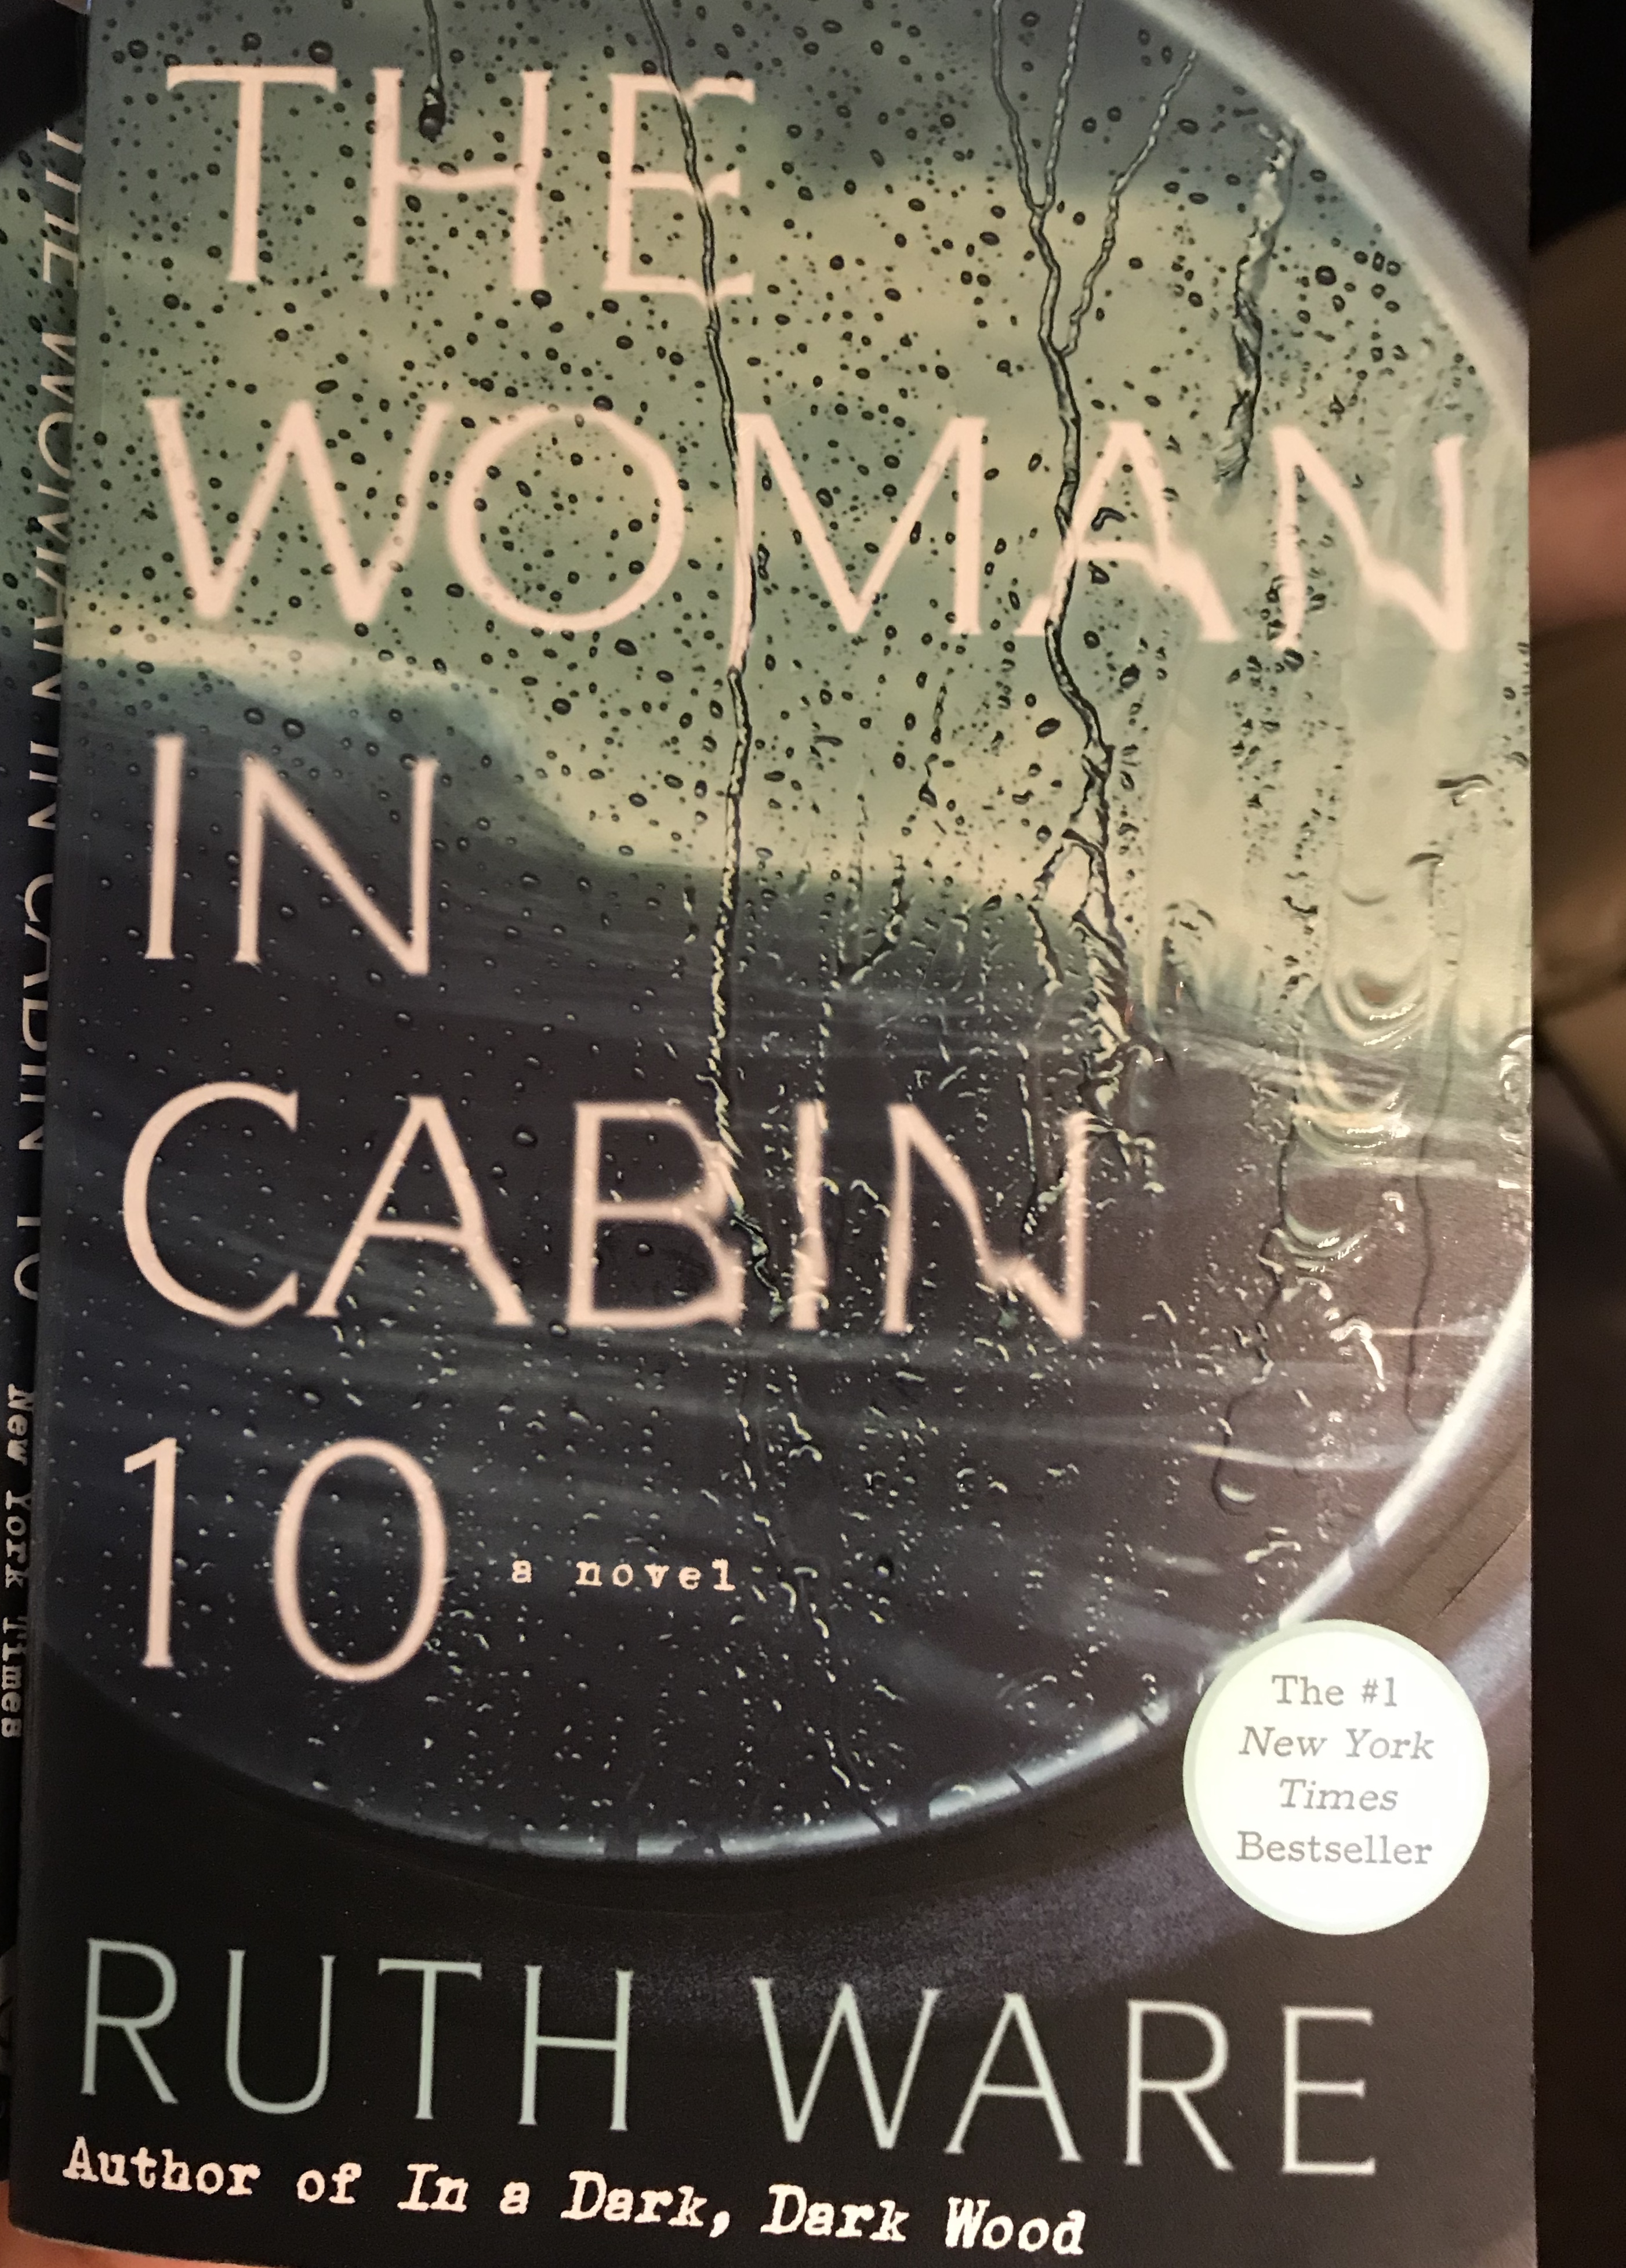 The Woman in Cabin 10 by Ruth Ware